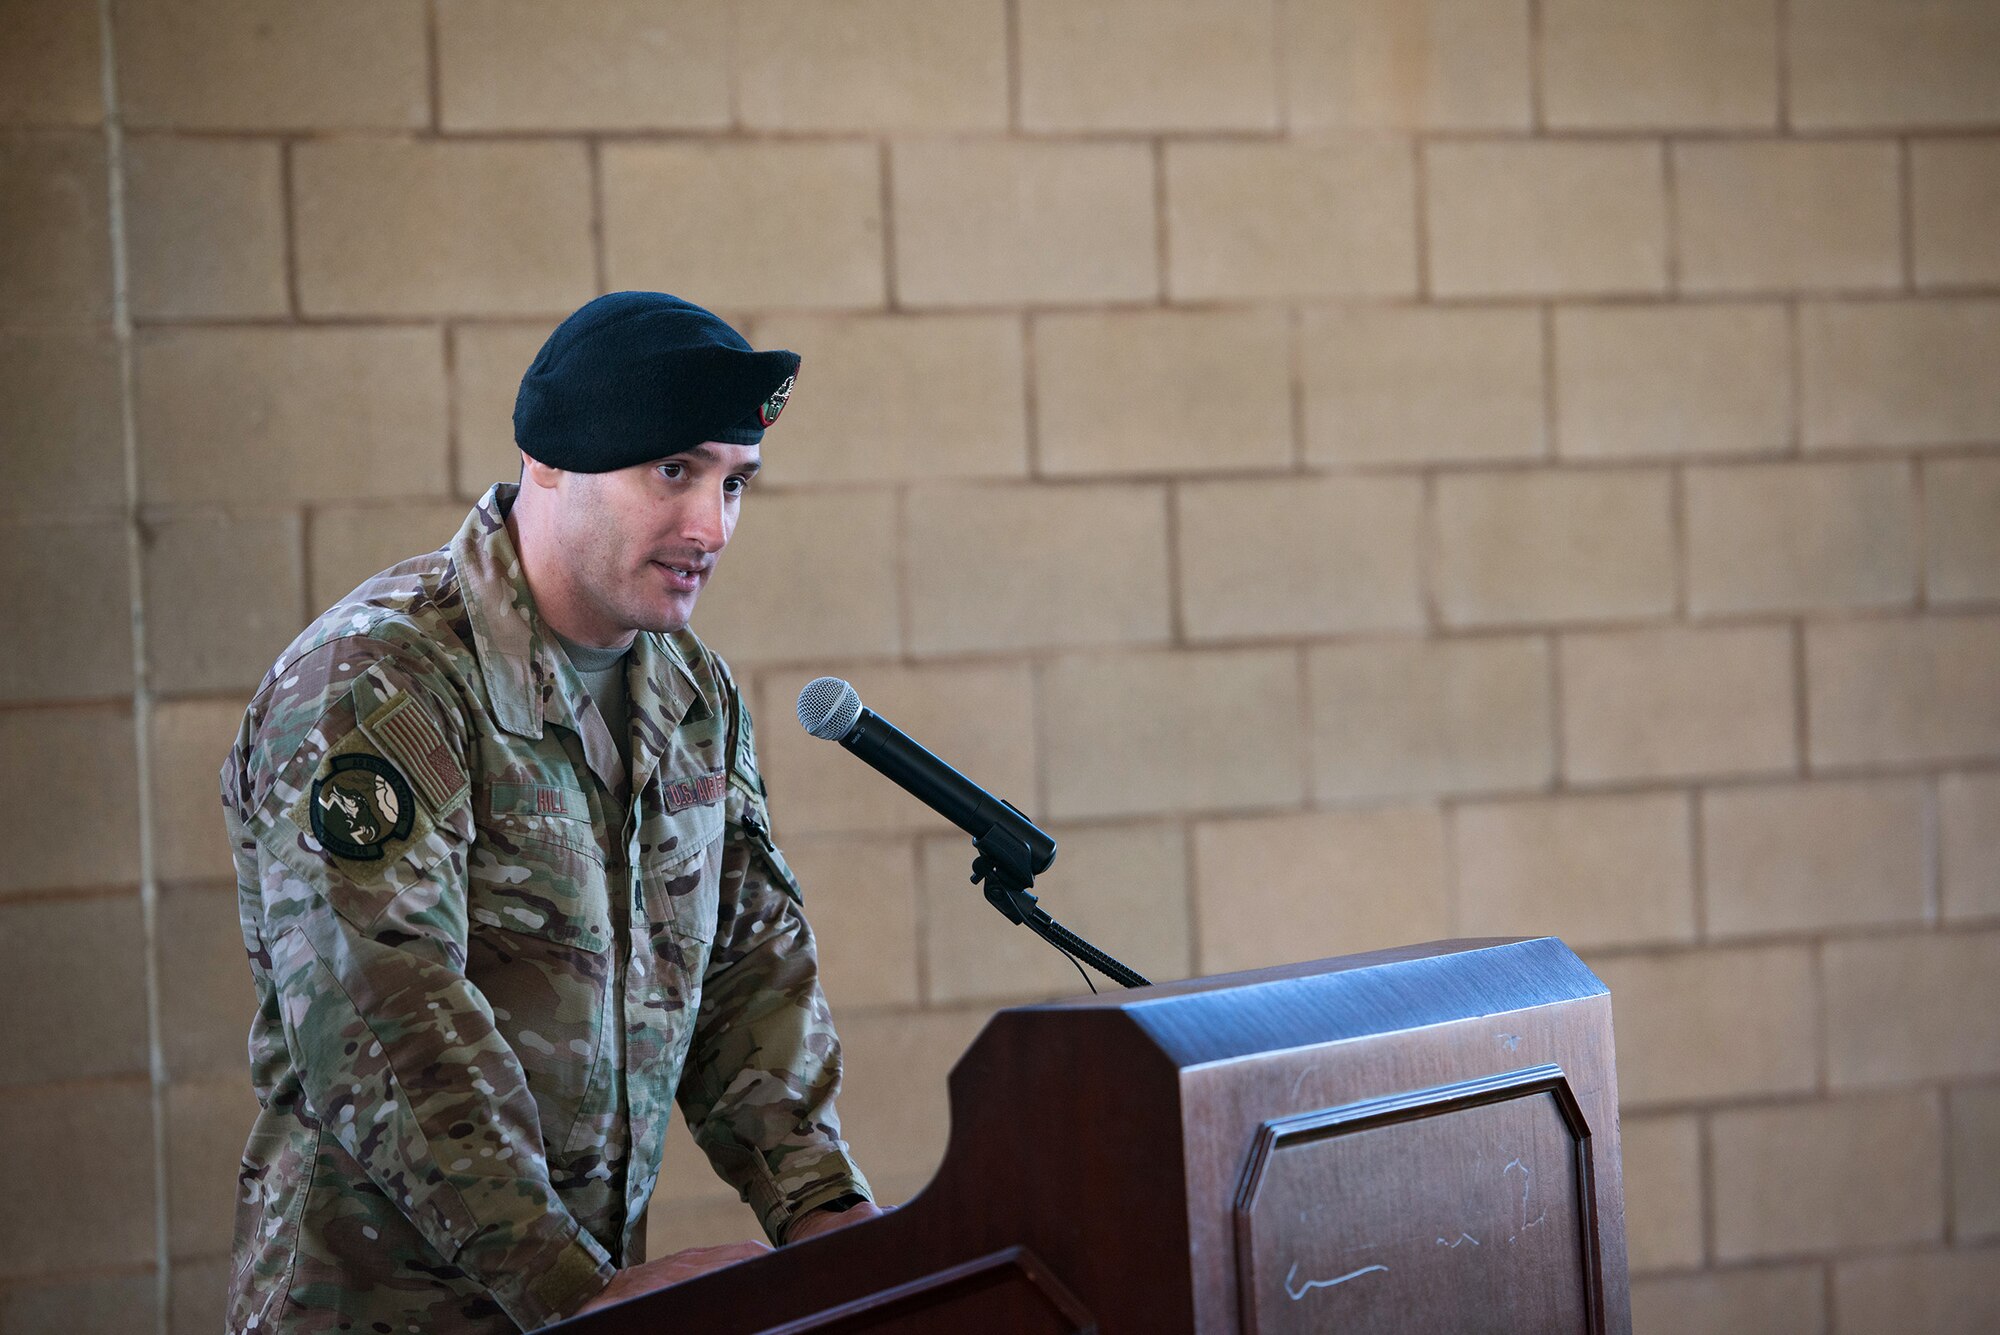 U.S. Air Force Capt. Daniel Hill, incoming commander, addresses the audience during the activation and assumption of command ceremony of Detachment 2, Combat Training Squadron, Sept. 17, 2019, at Joint Base San Antonio-Medina Annex, Texas.